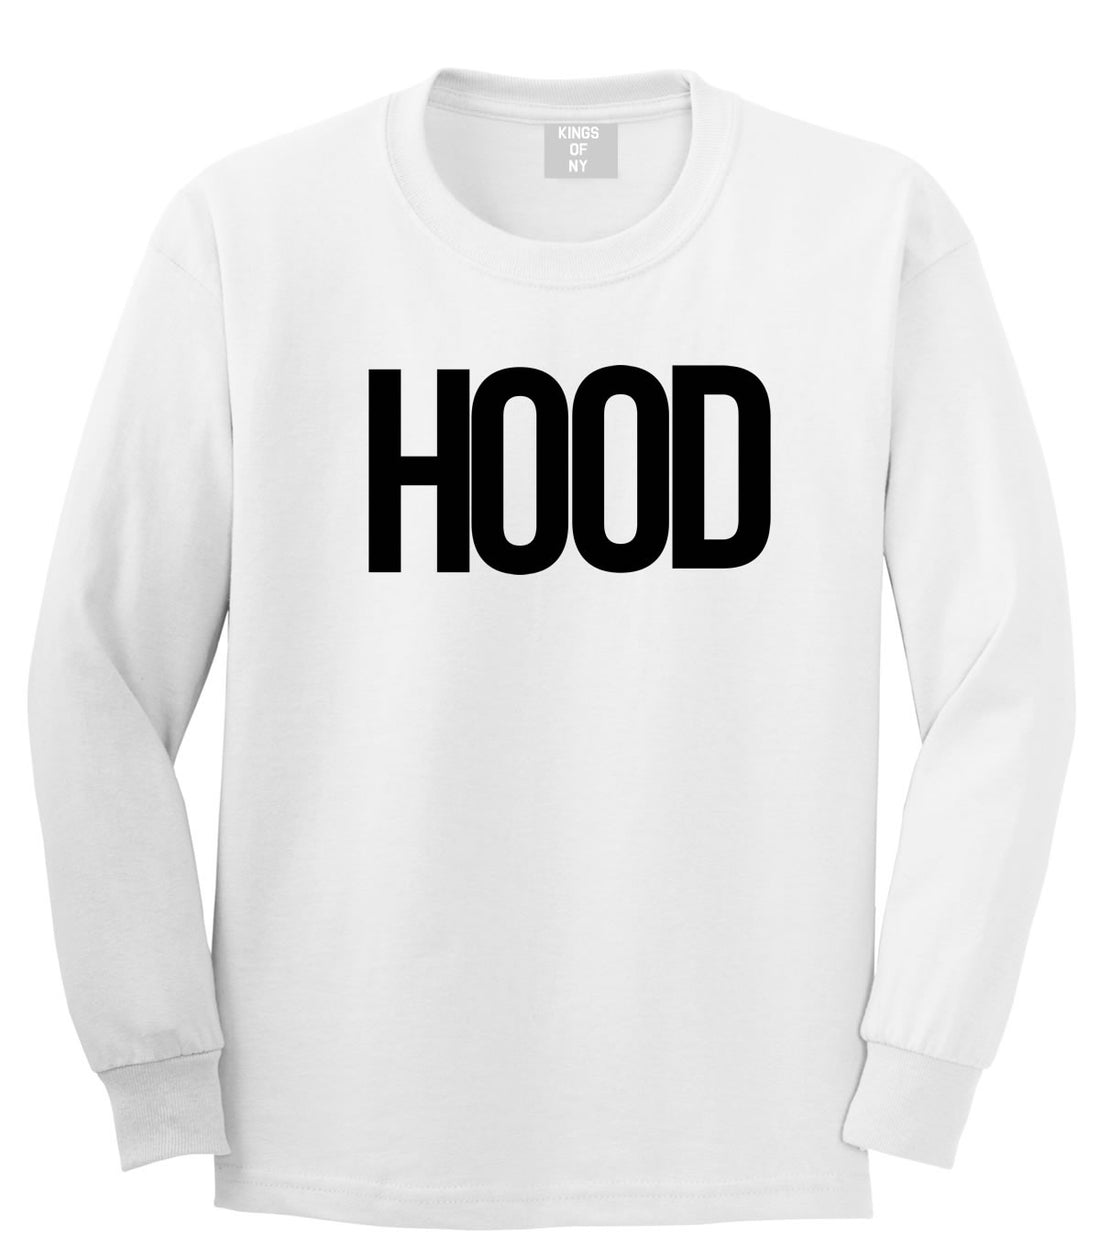 Hood Trap Style Compton New York Air Long Sleeve Boys Kids T-Shirt in White by Kings Of NY